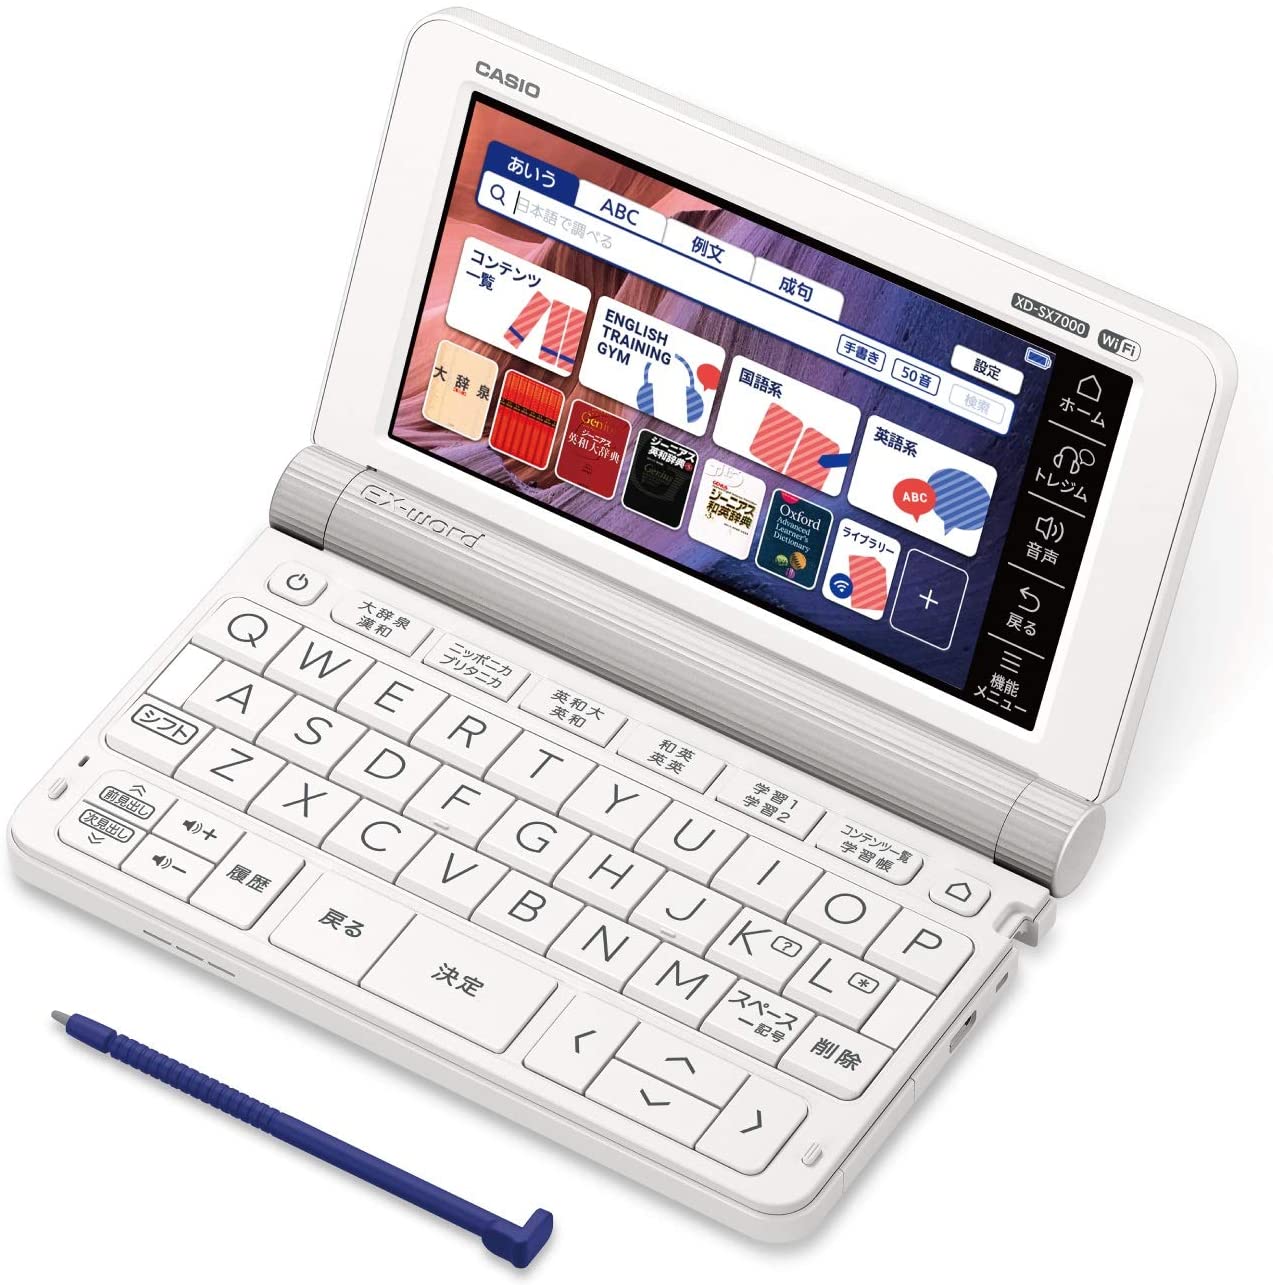 CASIO EX-word XD-SX7000 Japanese English Electronic Dictionary